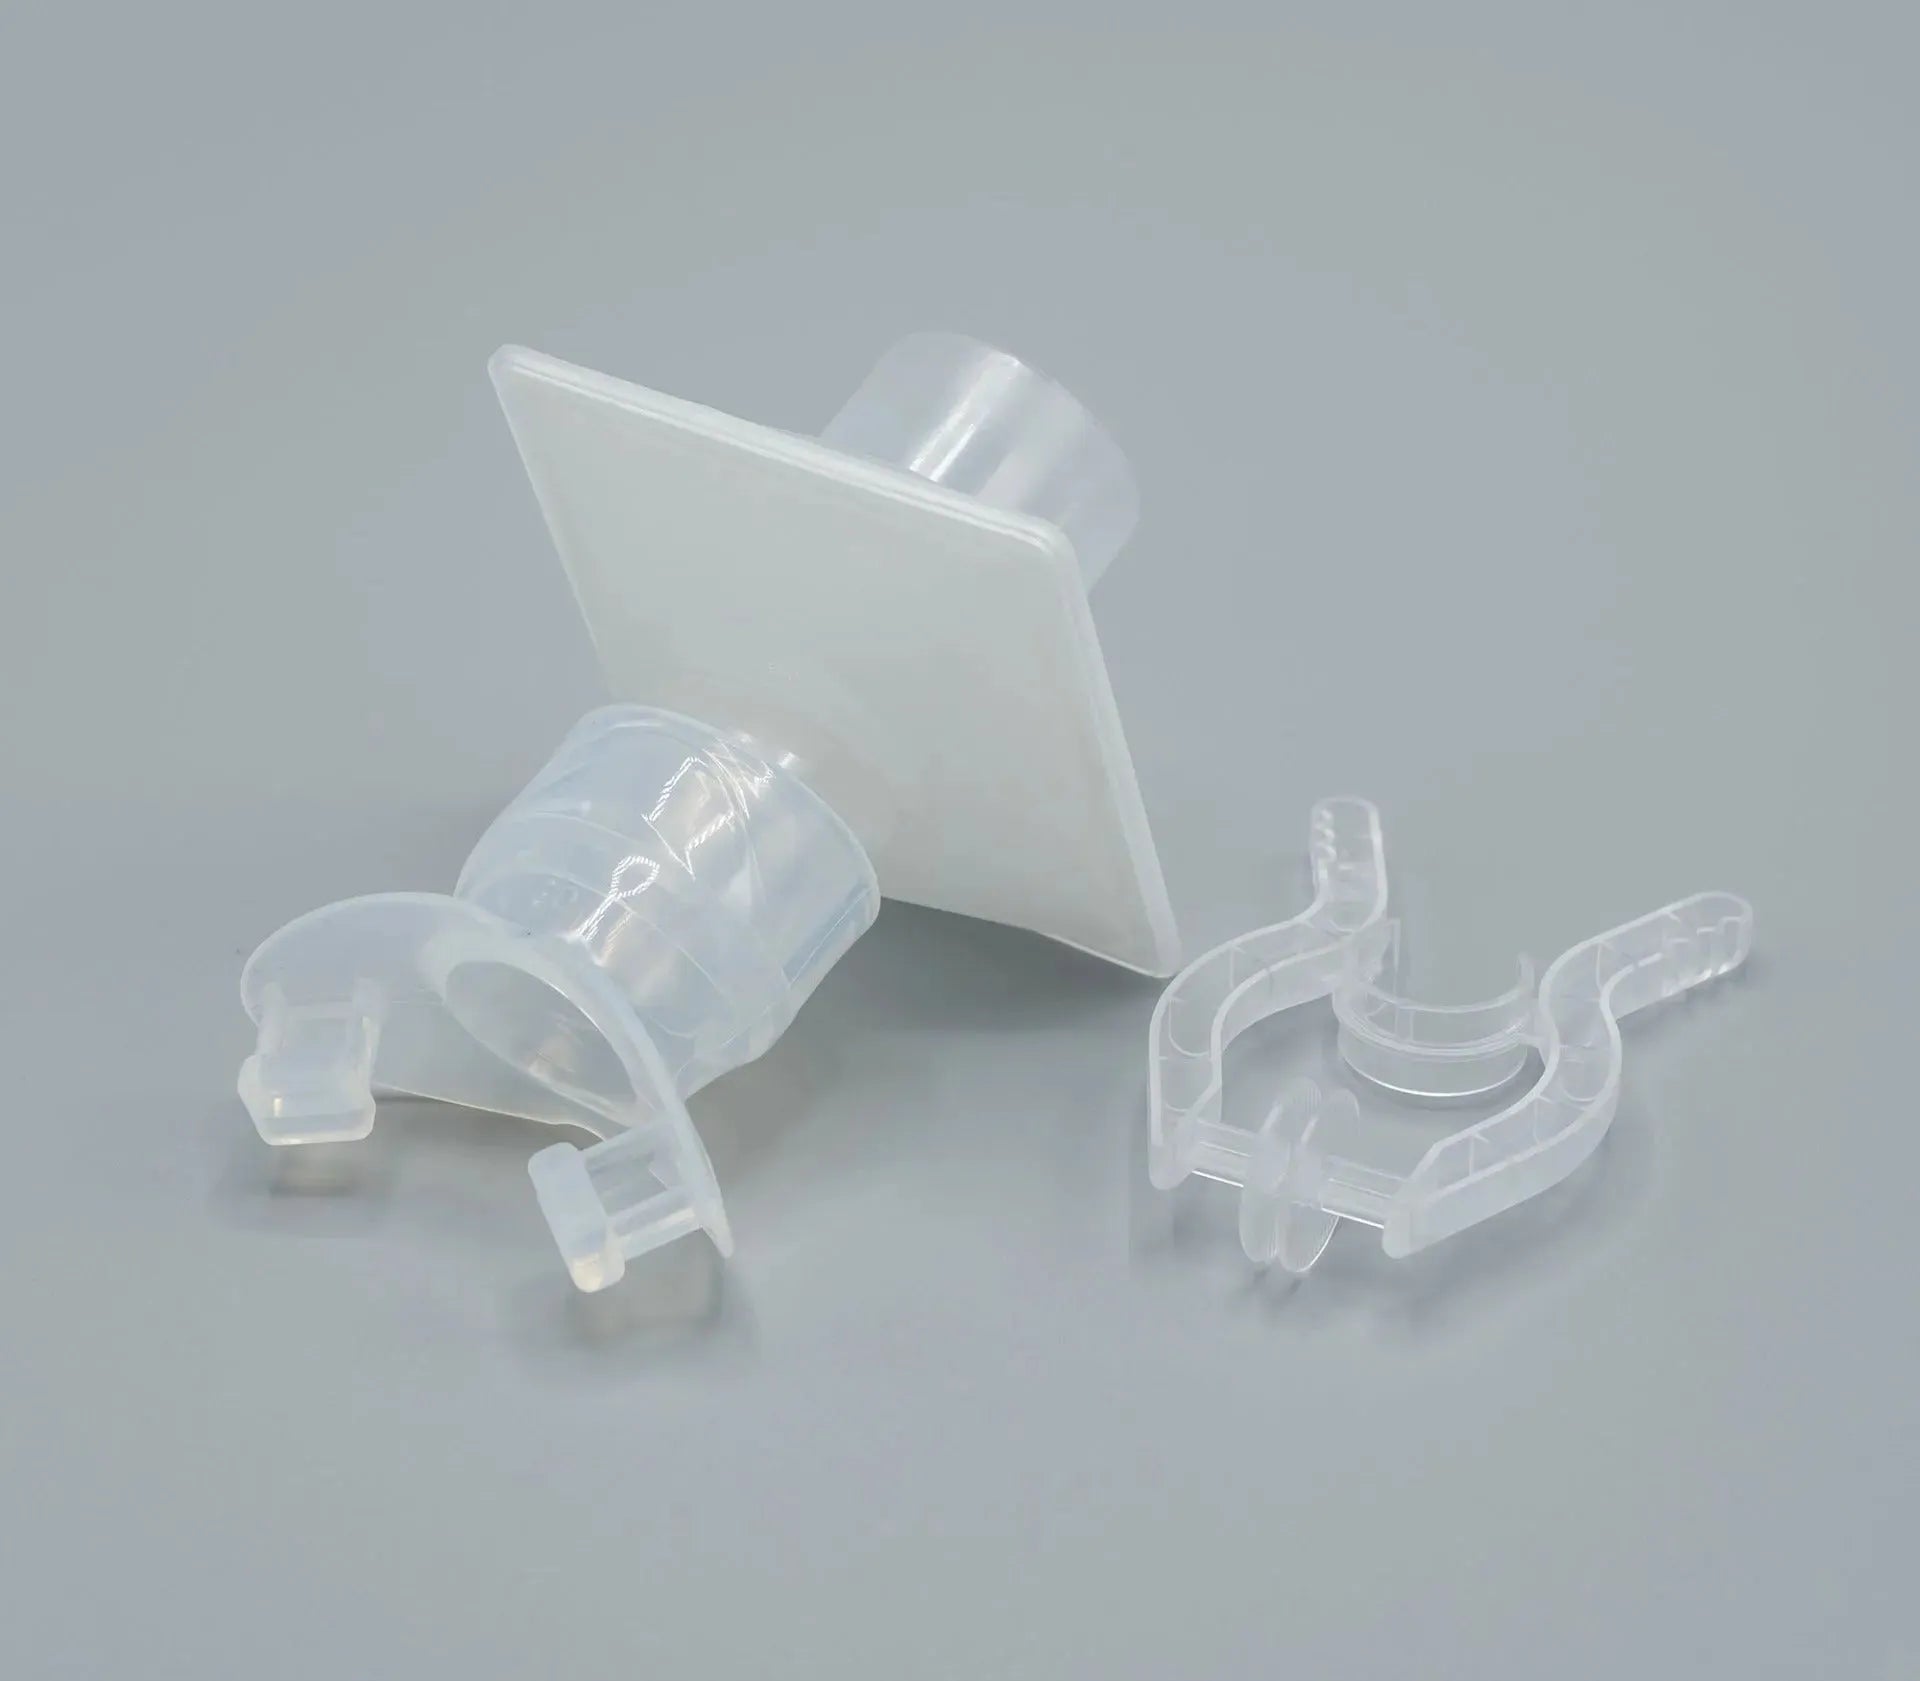 The components of the Eco Lab Spiro Bacterial/Viral Filter kit are white translucent in color.  Along with the filter, an elliptical mouthpiece with a clear silicone front bite and an all-plastic eco-disposable nose clip are shown.